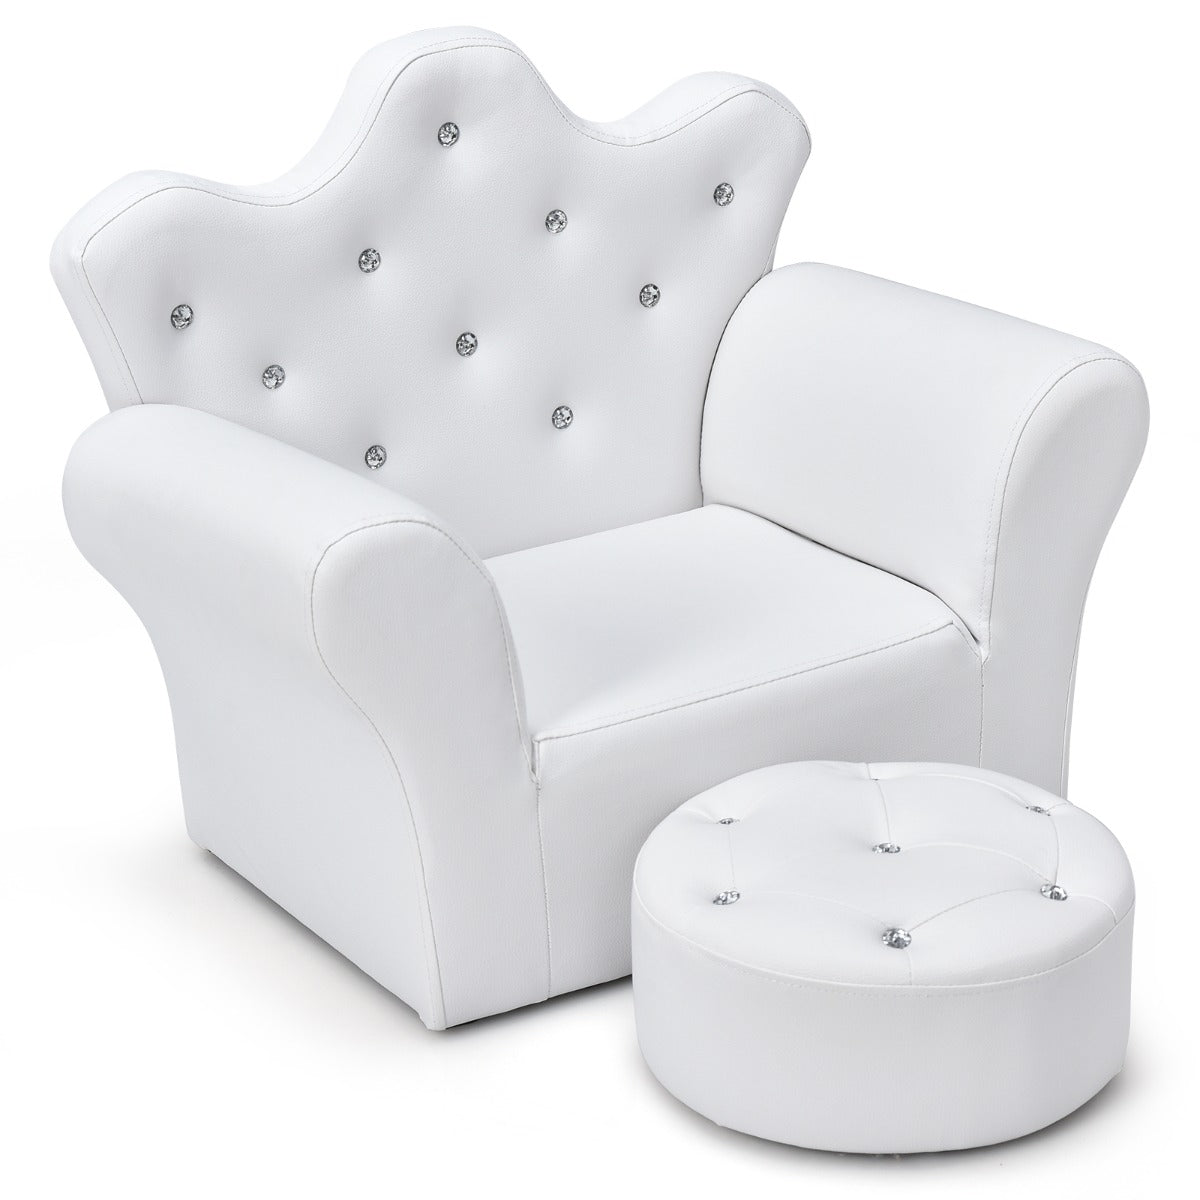 Kids Sofa with Crown-Shaped Backrest & Ottoman: Regal Seating for Toddlers